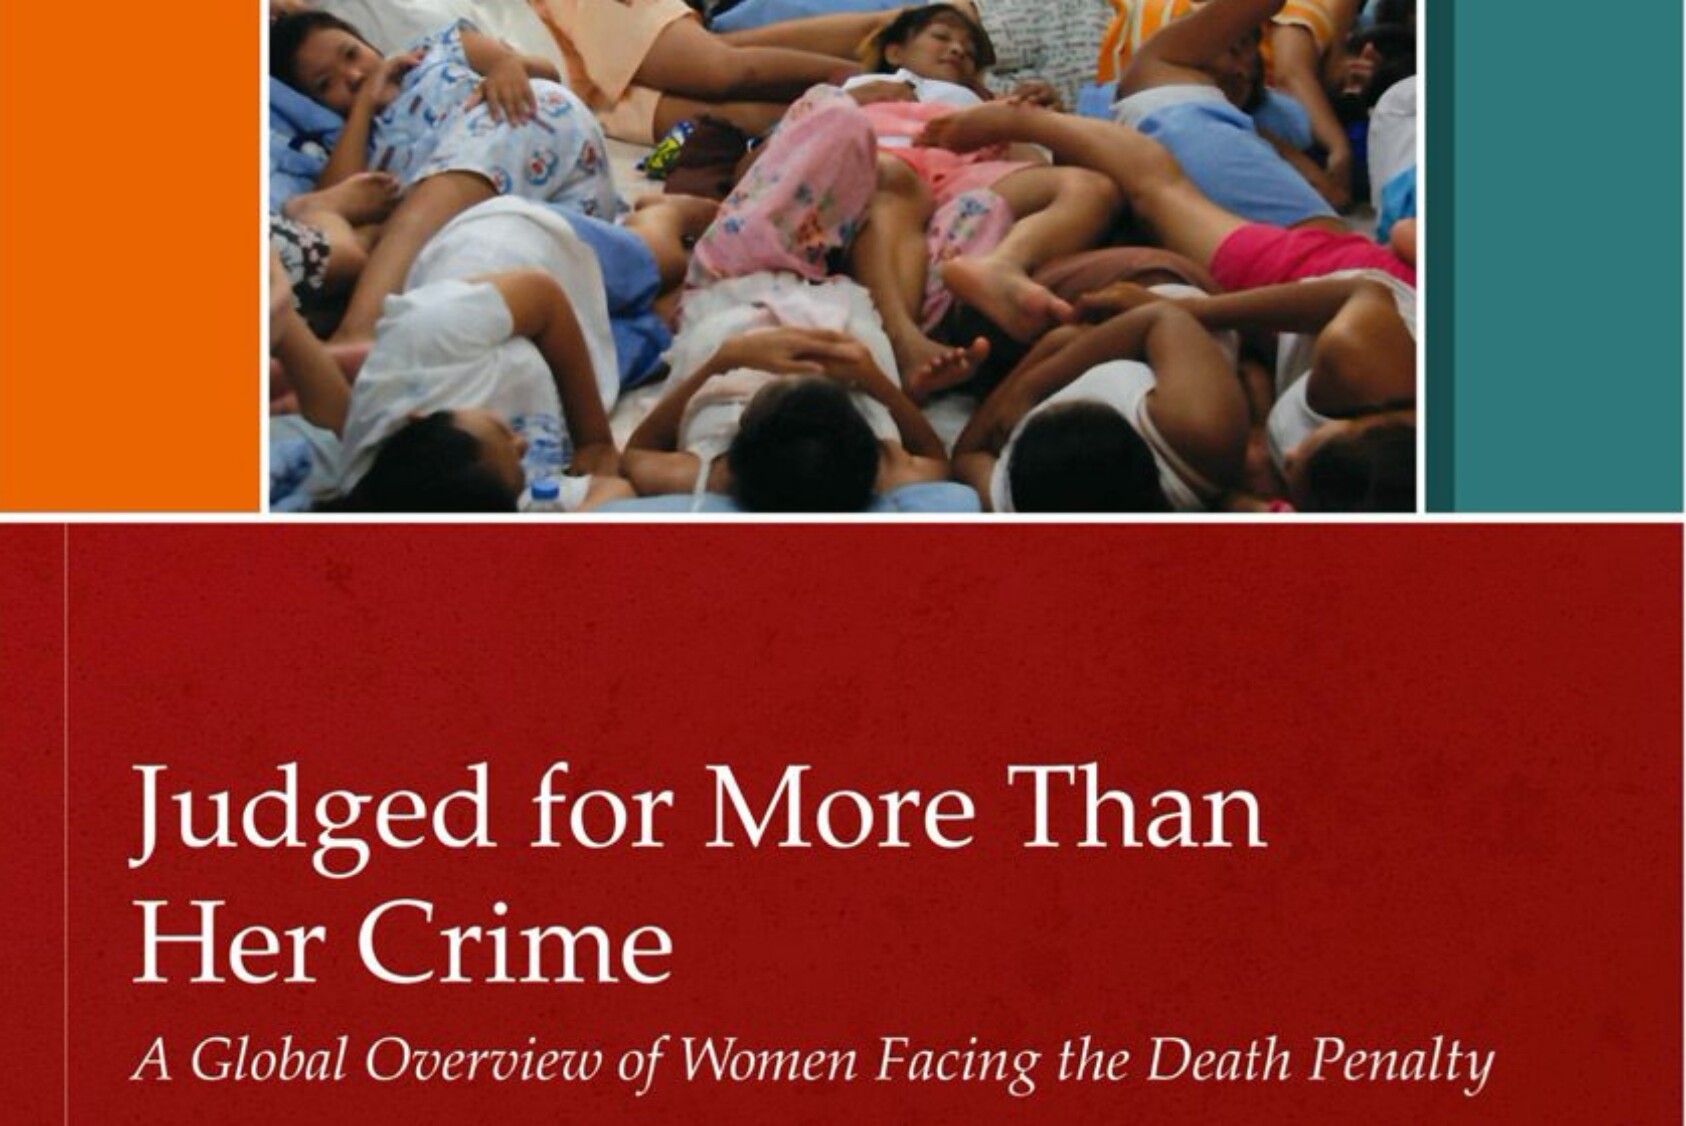 “Women around the world are sentenced to death for killing their abusers—after lifetimes of gender-based violence. We are training capital defense lawyers, conducting research to enlighten policy makers and courts, and working directly with women to tell their stories. CCDPW is the only organization defending these women.” —The Alice Project team